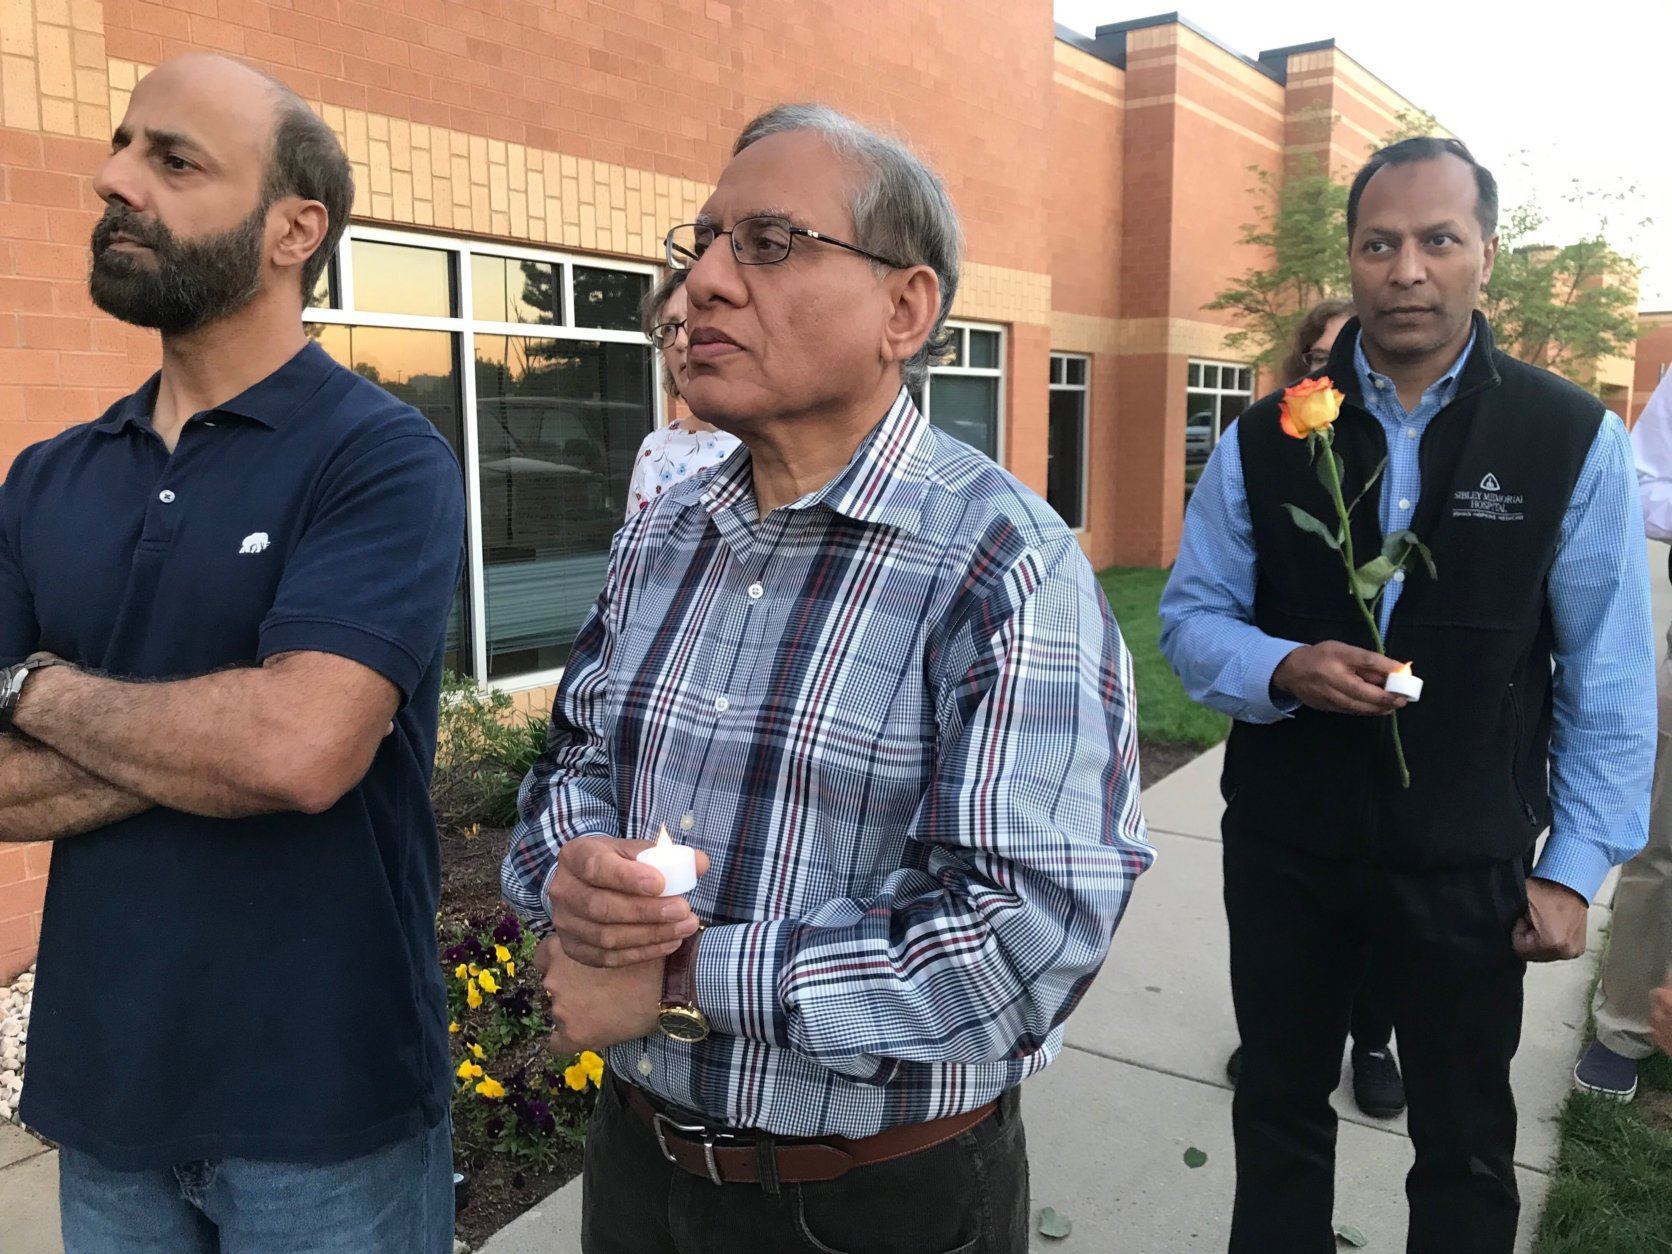 Dozens of the faithful gathered outside the Ashburn Mosque in Sterling, Virginia, to pray and offer hope following the devastating, coordinated attacks in Sri Lanka on Easter Sunday. (WTOP/Dick Uliano)